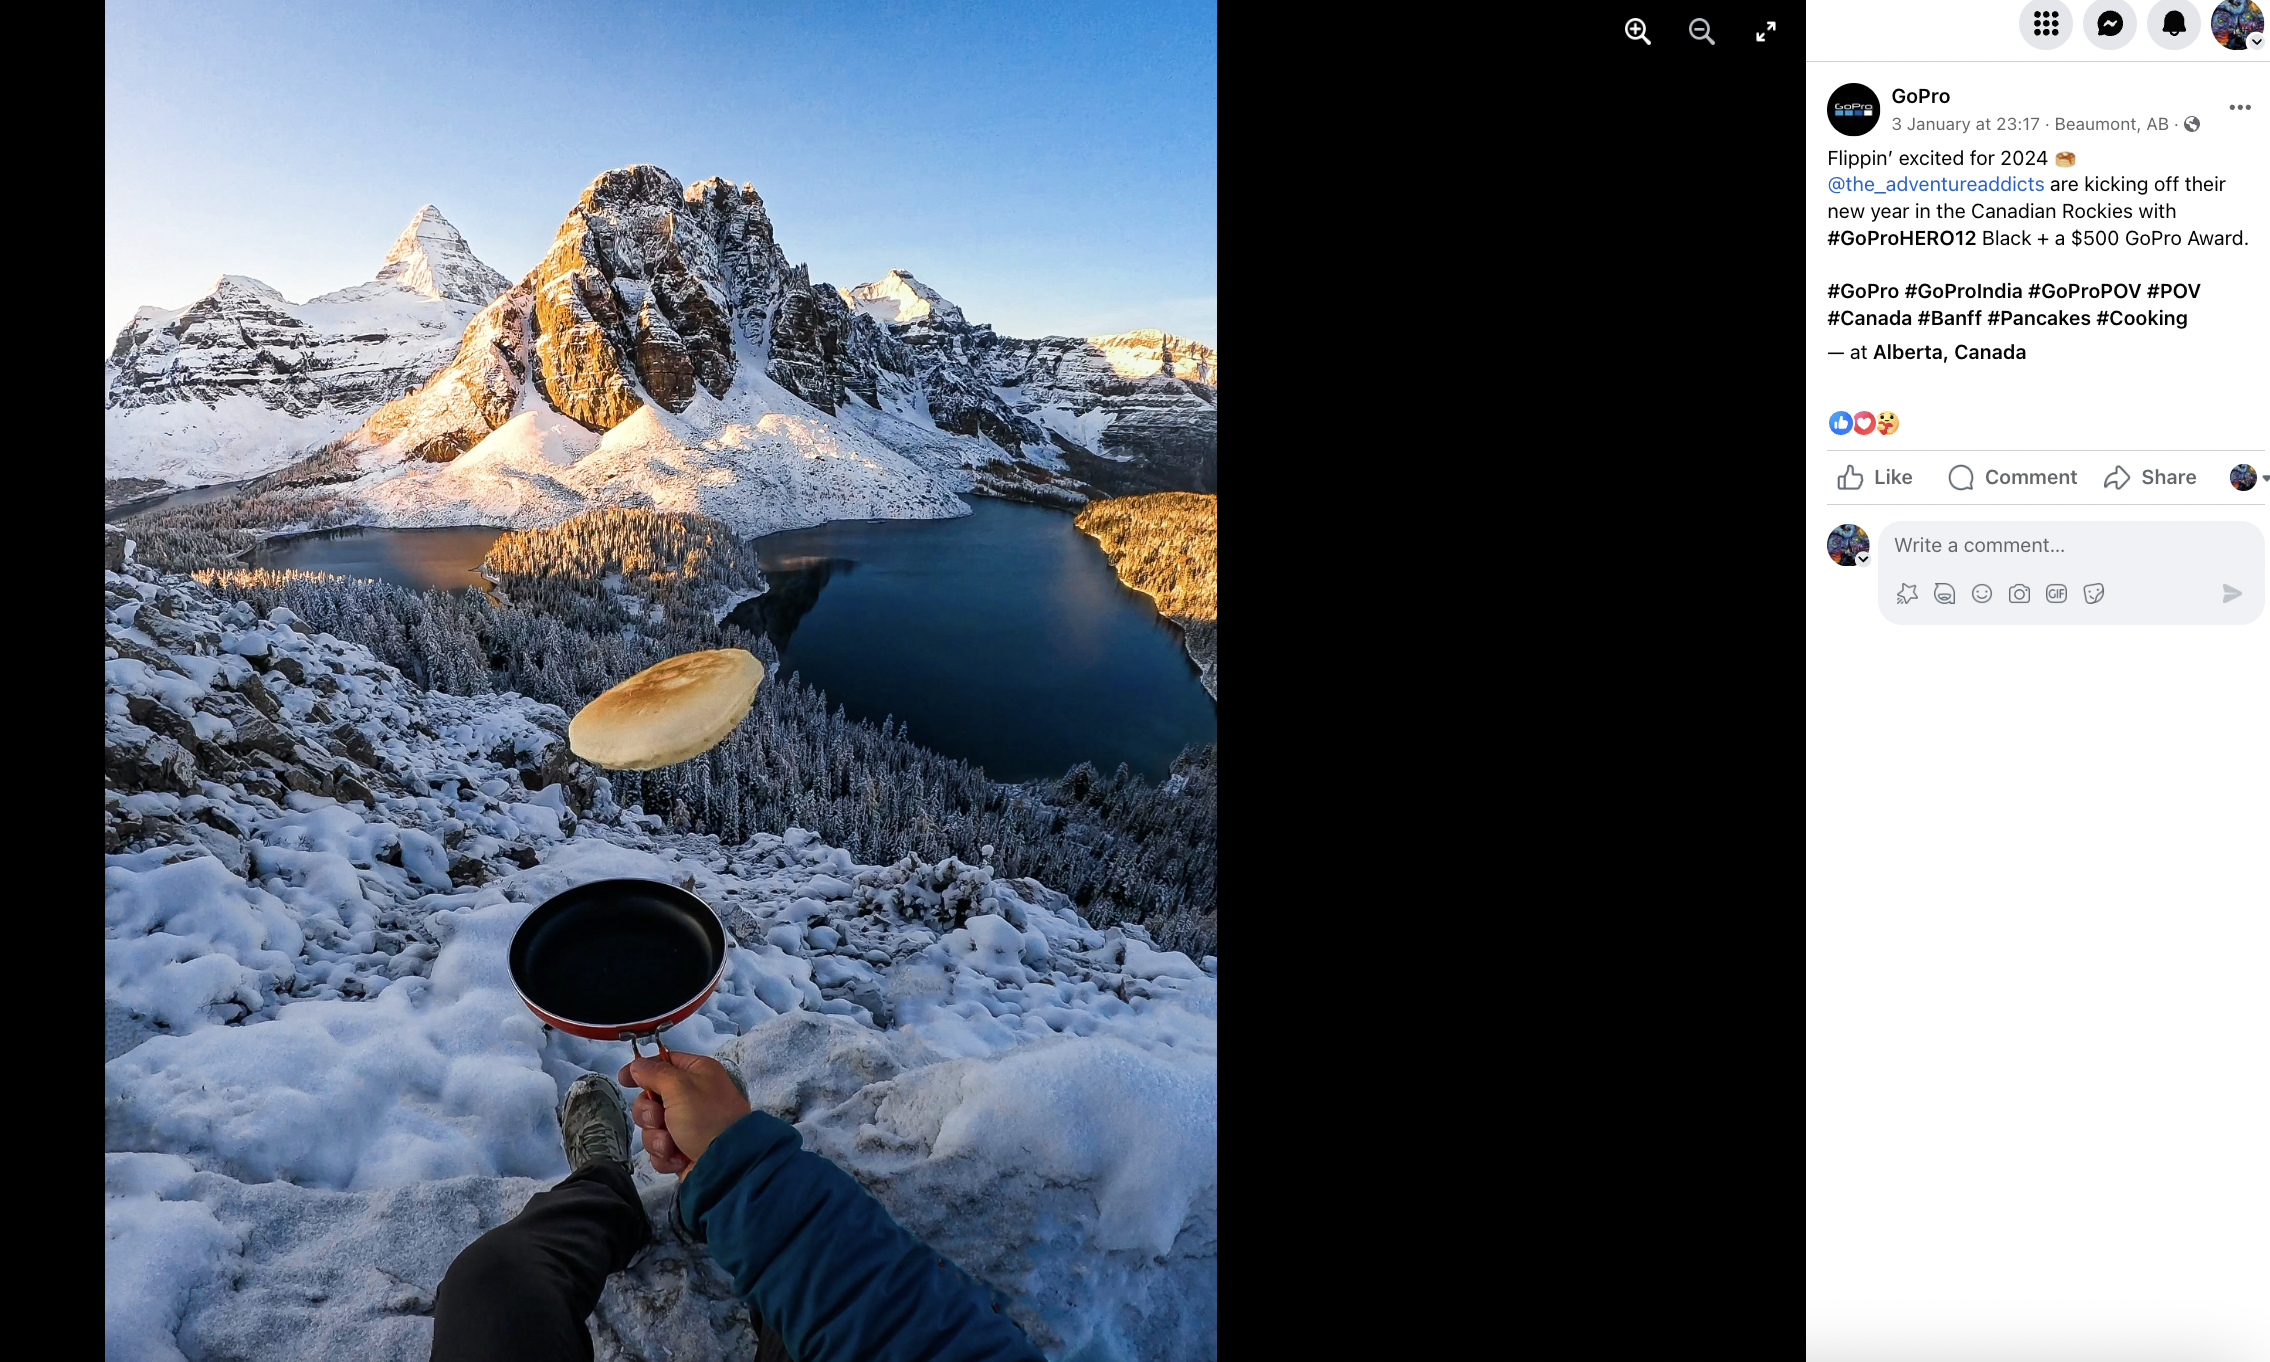 GoPro facebook post of a person flipping a pancake against the backdrop of a snowy mountain with a caption that says "Flippin' excited for 2024 @the_adventureaddicts are kicking off their new year in the Canadian Rockies with #GoProHERO12 Black + a $500 GoPro Award"